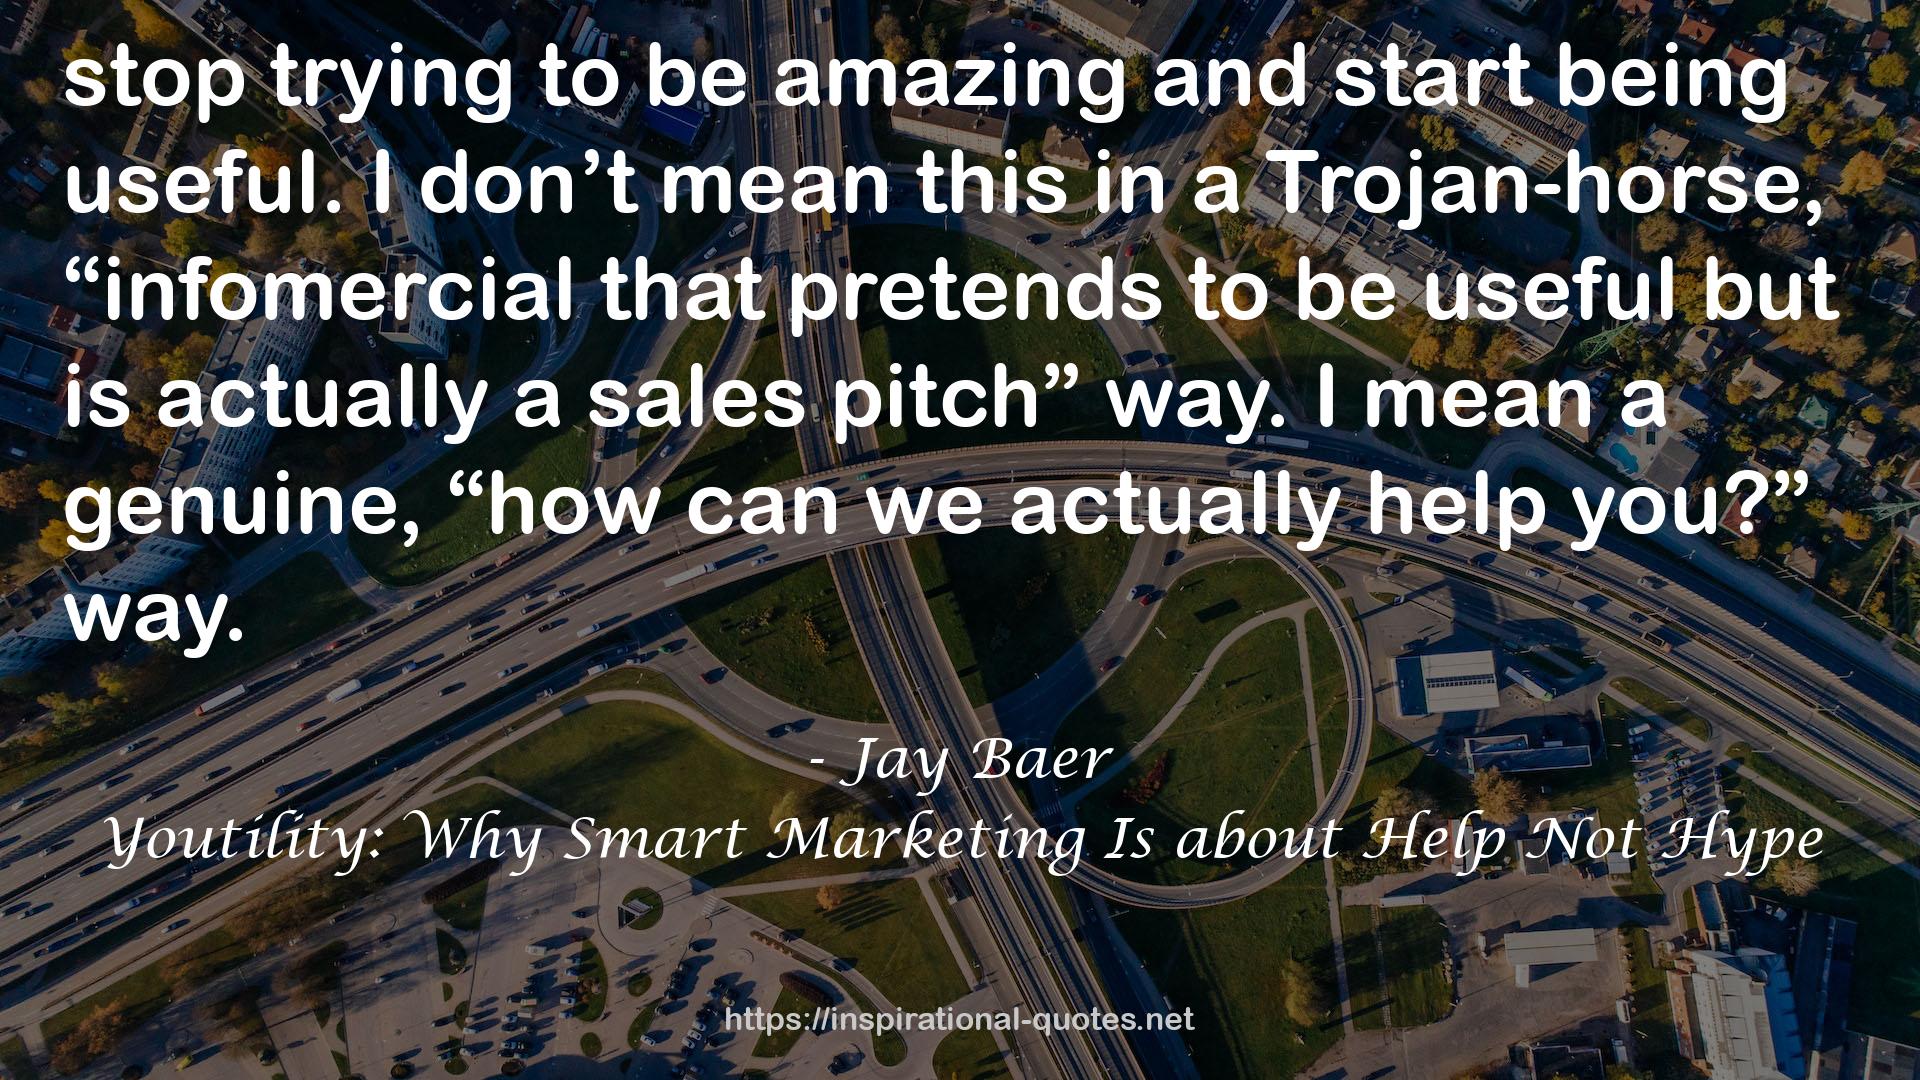 Youtility: Why Smart Marketing Is about Help Not Hype QUOTES